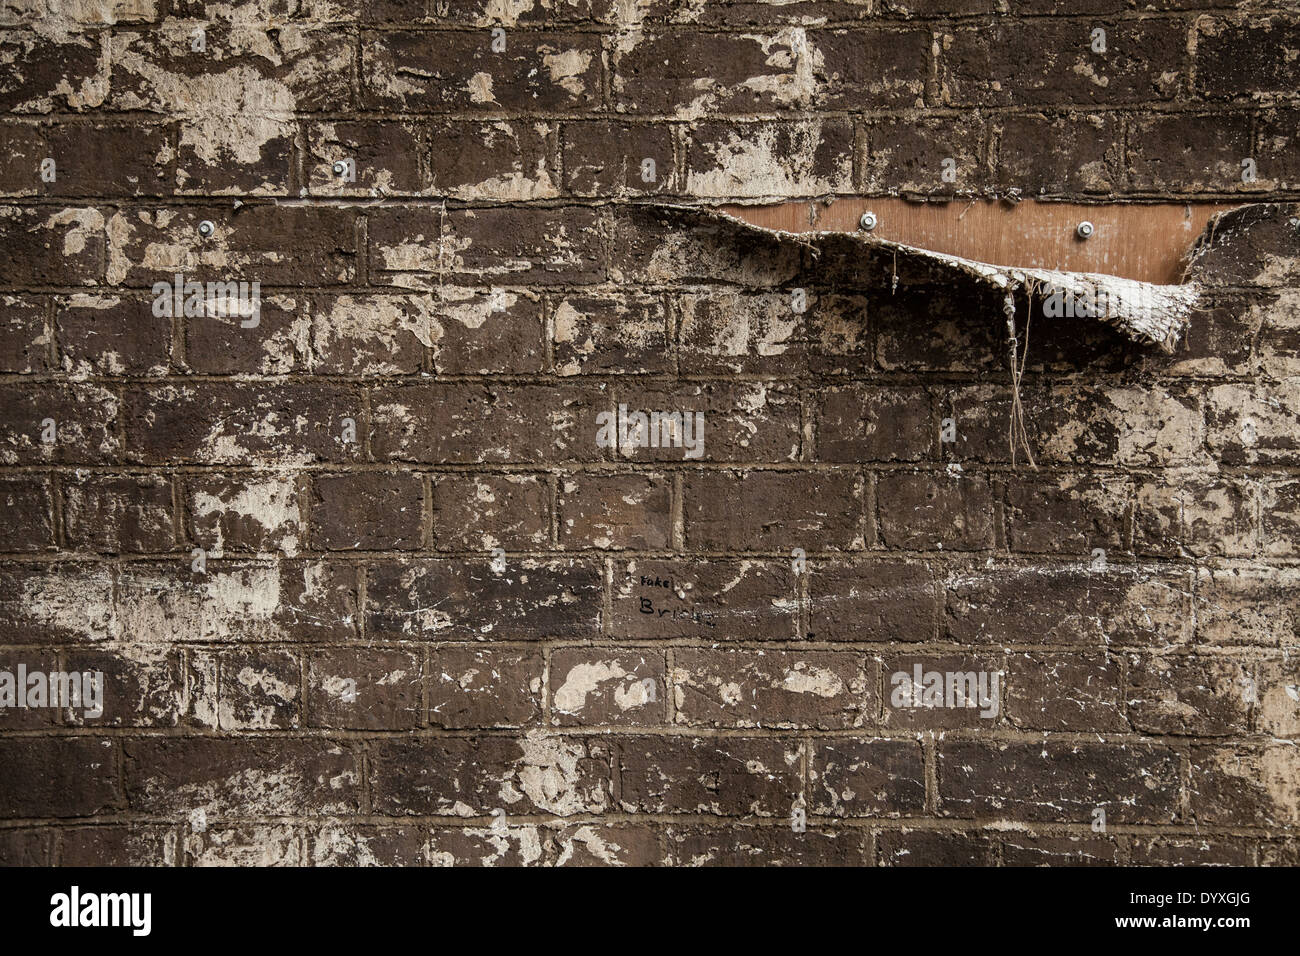 A tear in a fabric used to make a fake brick wall on a theatre set revealing the wooden background Stock Photo